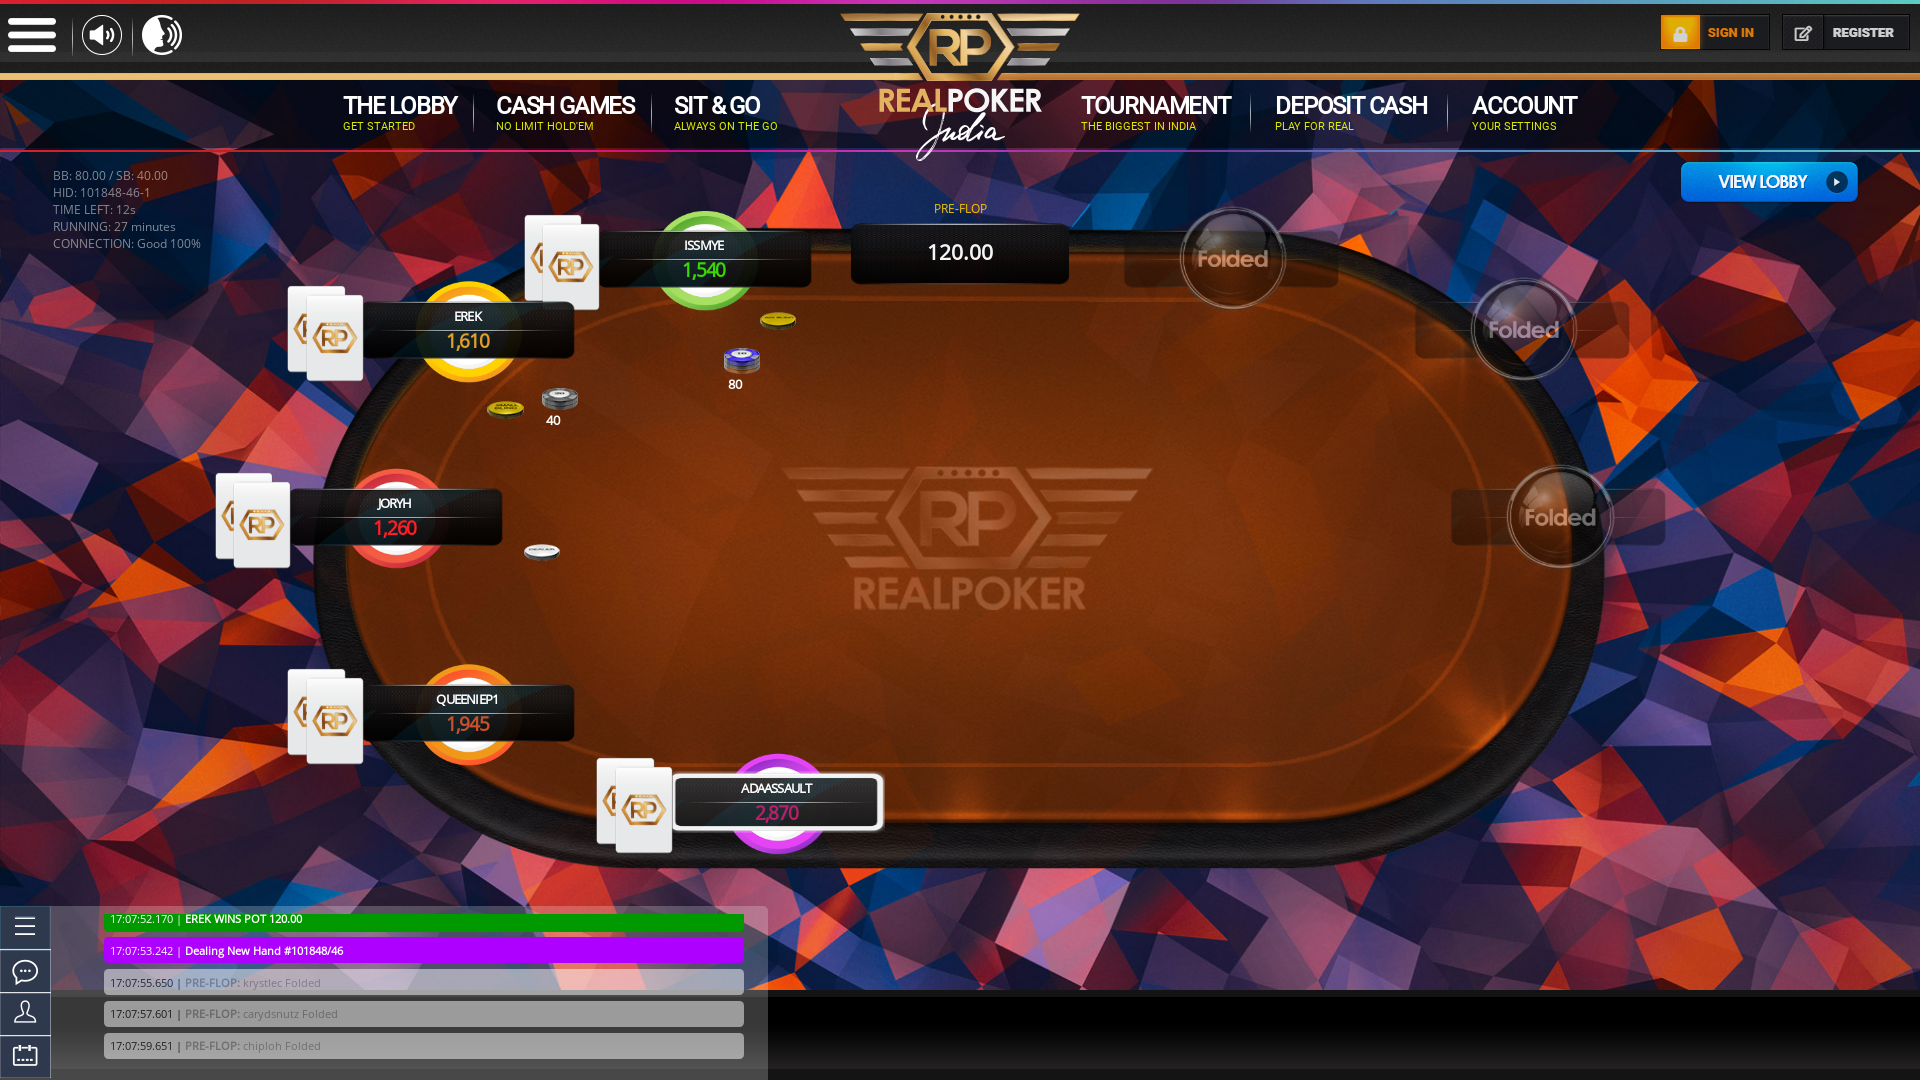 Real poker 10 player table in the 26th minute of the match